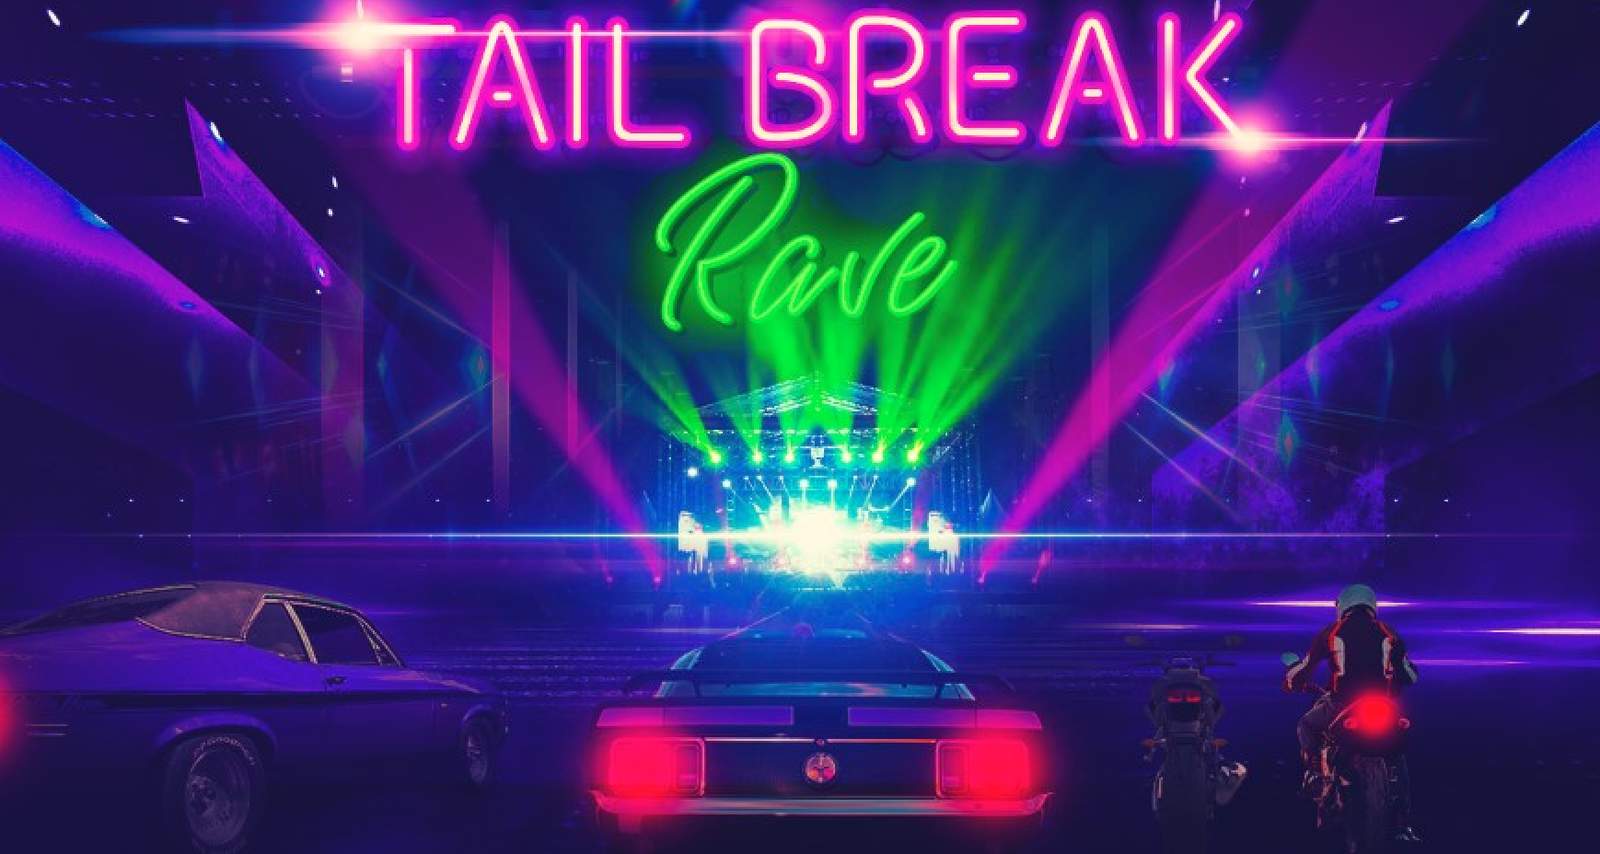 Drive-in style rave coming to downtown Orlando parking lot in August